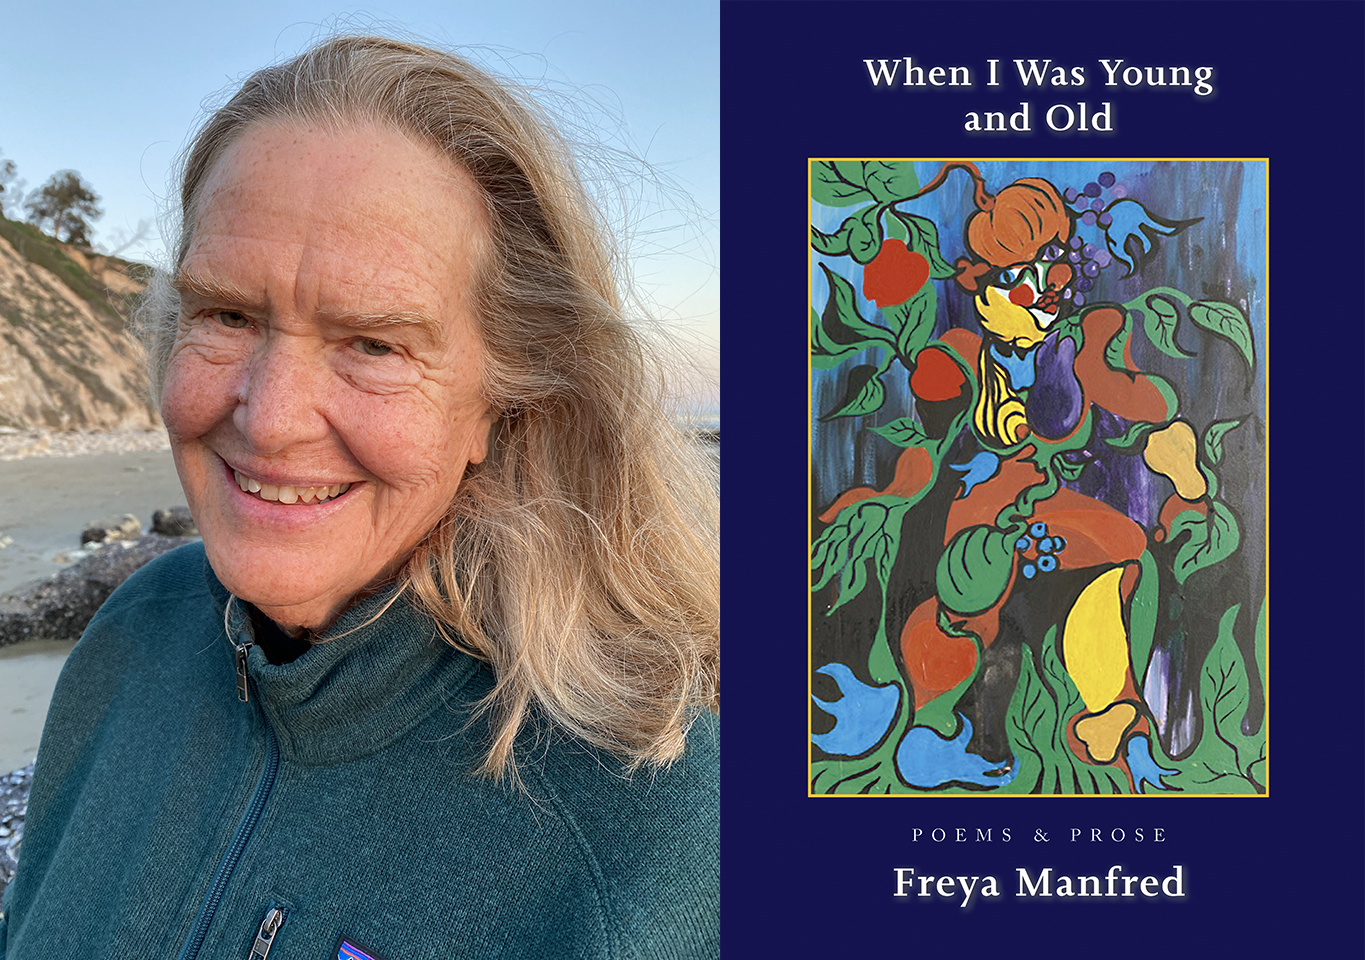 Freya Manfred portrait photo and book cover of When I Was Young and Old